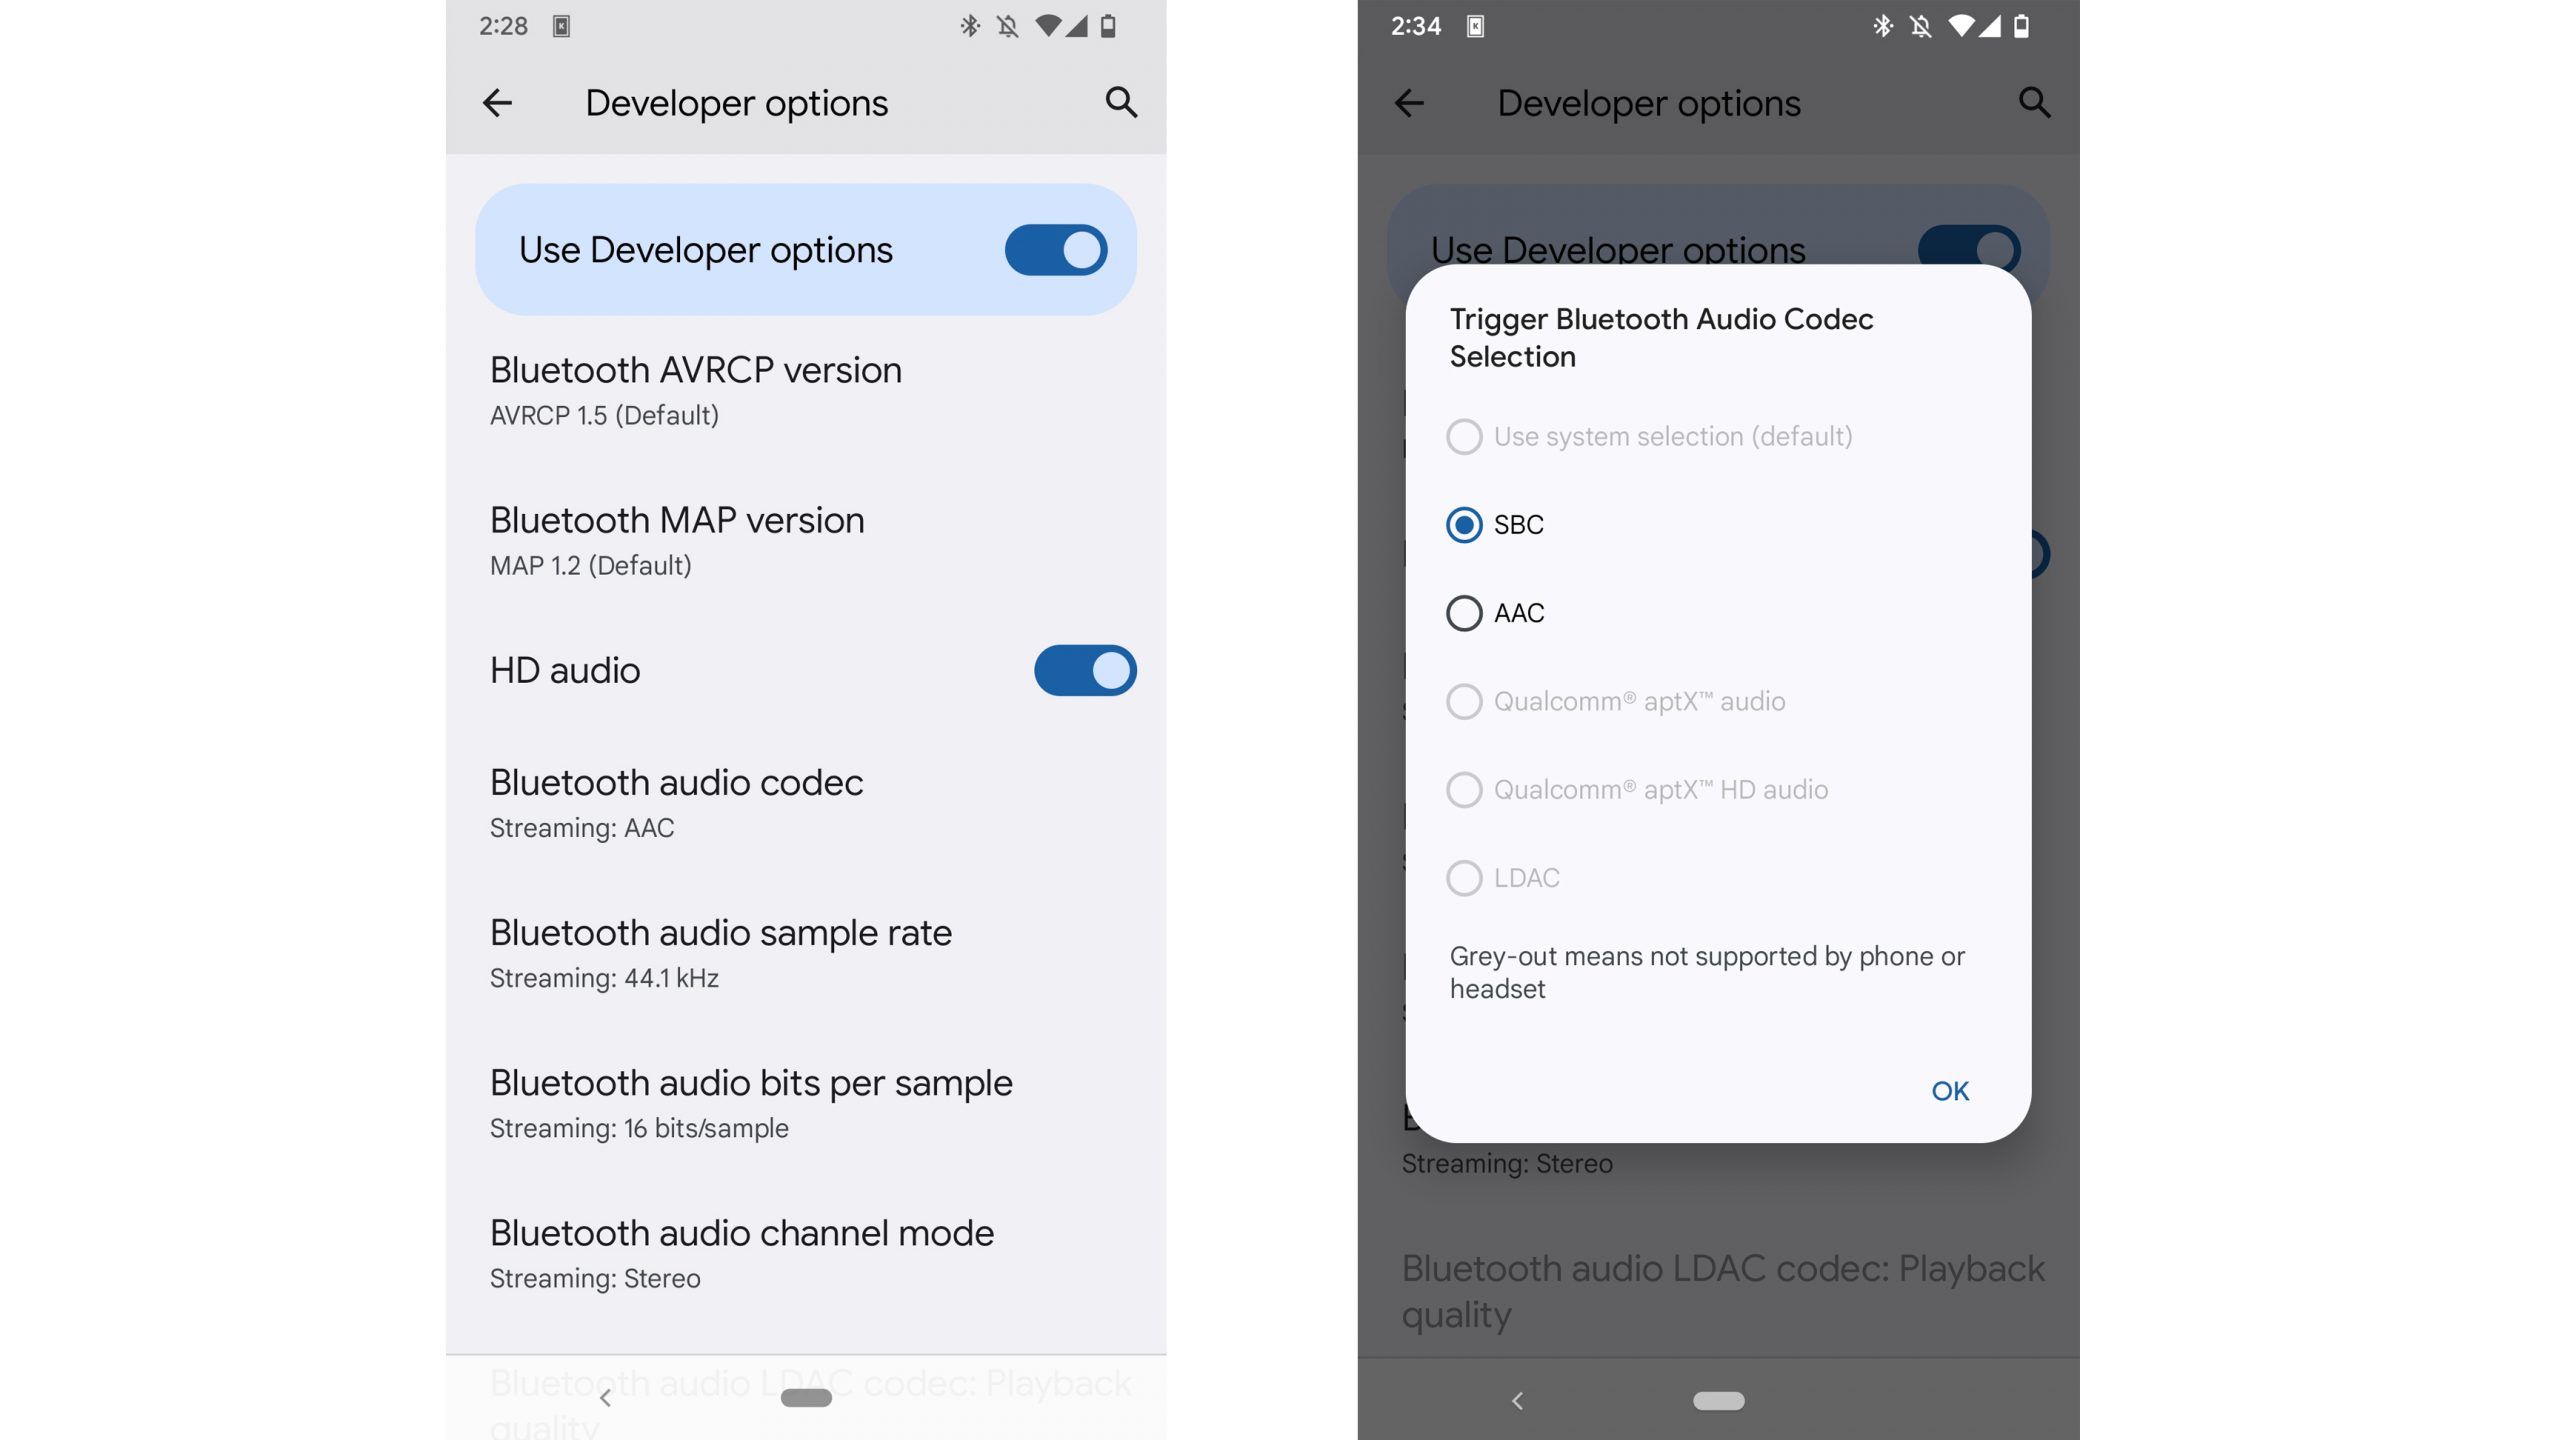 Two screenshots placed next to each other of an Android phone's settings screens. The left is the developer options menu, and the right is the Bluetooth codec seletion menu where all options except SBC and AAC are grayed out. Left screenshot text transcription: Developer options. Use Developer options. Bluetooth AVRCP version. AVRCP 1.5 (Default). Bluetooth MAP version MAP 1.2 (Default). HD audio. Bluetooth audio codec. Streaming: AAC. Bluetooth audio sample rate Streaming: 44.1 kHz. Bluetooth audio bits per sample Streaming: 16 bits/sample. Bluetooth audio channel mode Streaming: Stereo. Bluetooth audio LAC codec: Playback quality. Right screen shot text transcription: Developer options. Use Developer options. Trigger Bluetooth Audio Codec Selection. Use system selection (default). SBC. AAC. Qualcomm® aptX&quot; audio. Qualcomm® aptX&quot; HD audio. LDAC. Grey-out means not supported by phone or headset. Ok.